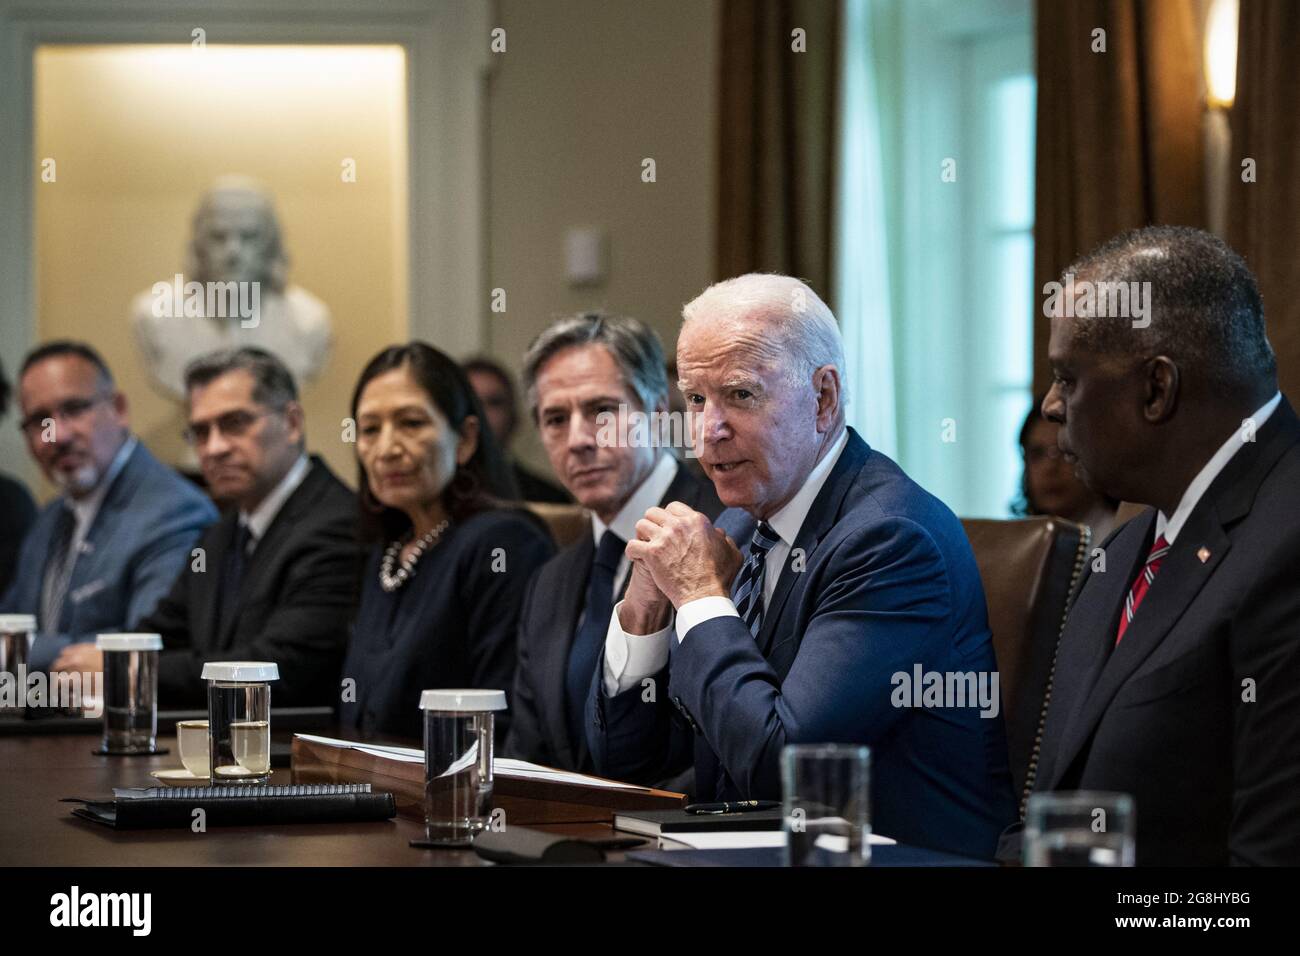 U.S. President Joe Biden speaks during a cabinet meeting at the White House in Washington, D.C., U.S., on Tuesday, July 20, 2021. Biden administration officials say they're starting to see signs of relief for the global semiconductor supply shortage, including commitments from manufacturers to make more automotive-grade chips for car companies. Photo by Al Drago/Pool/ABACAPRESS.COM Stock Photo